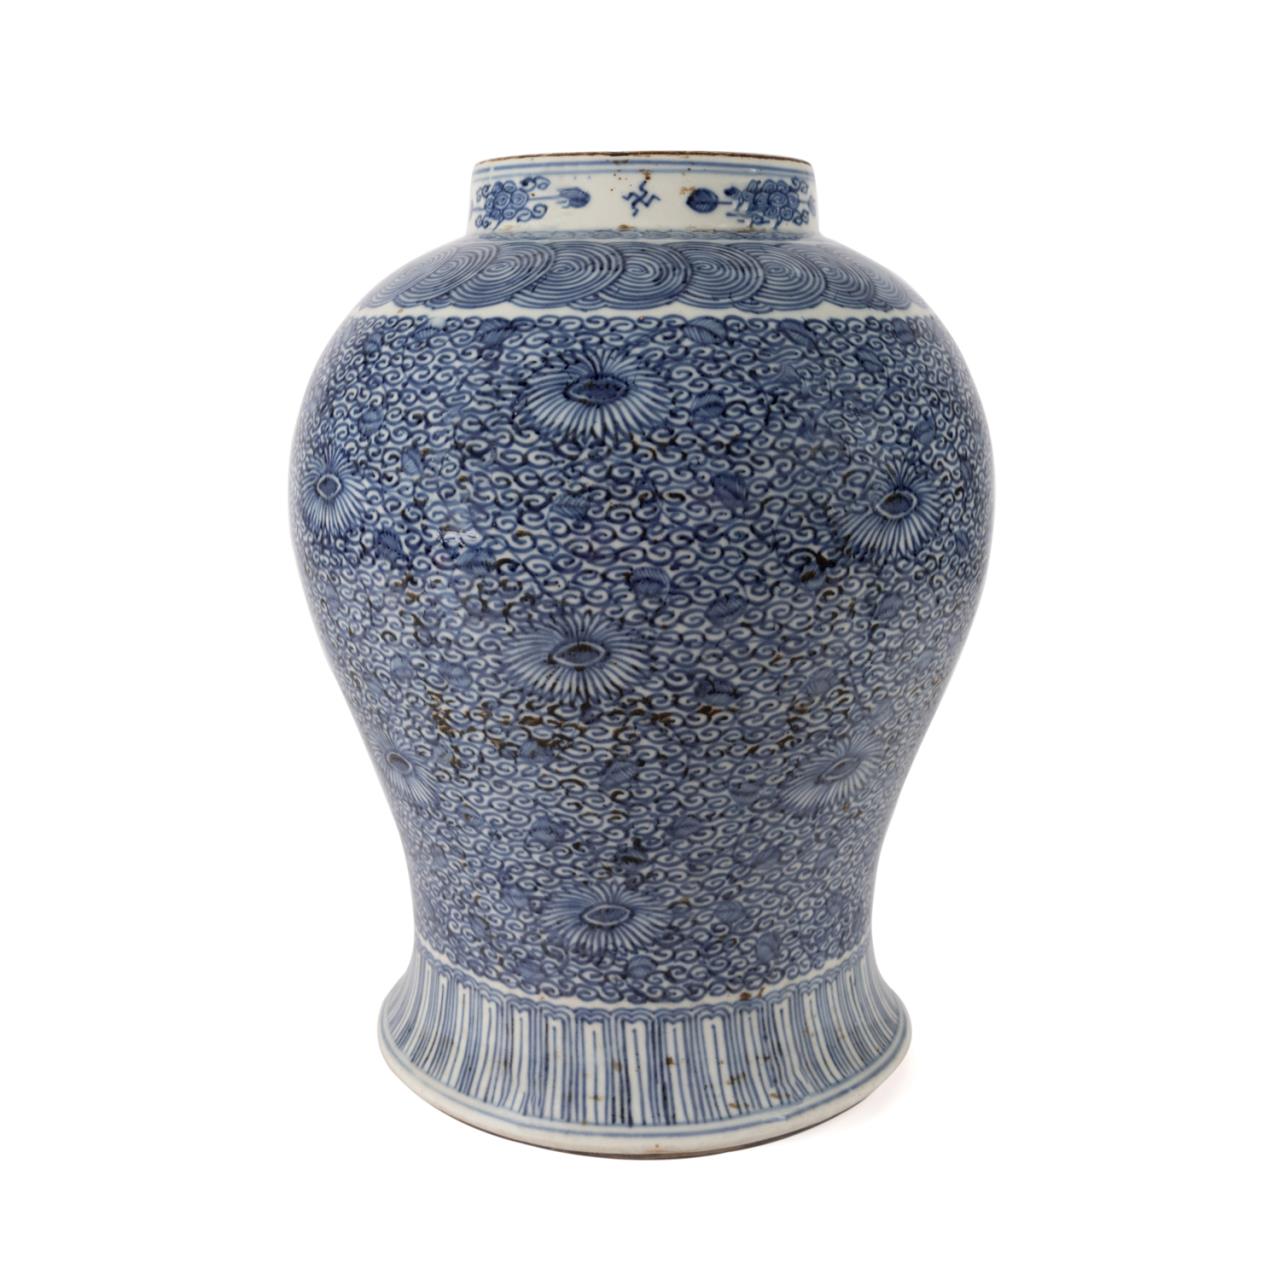 CHINESE BLUE WHITE FLORAL JAR 3cd433